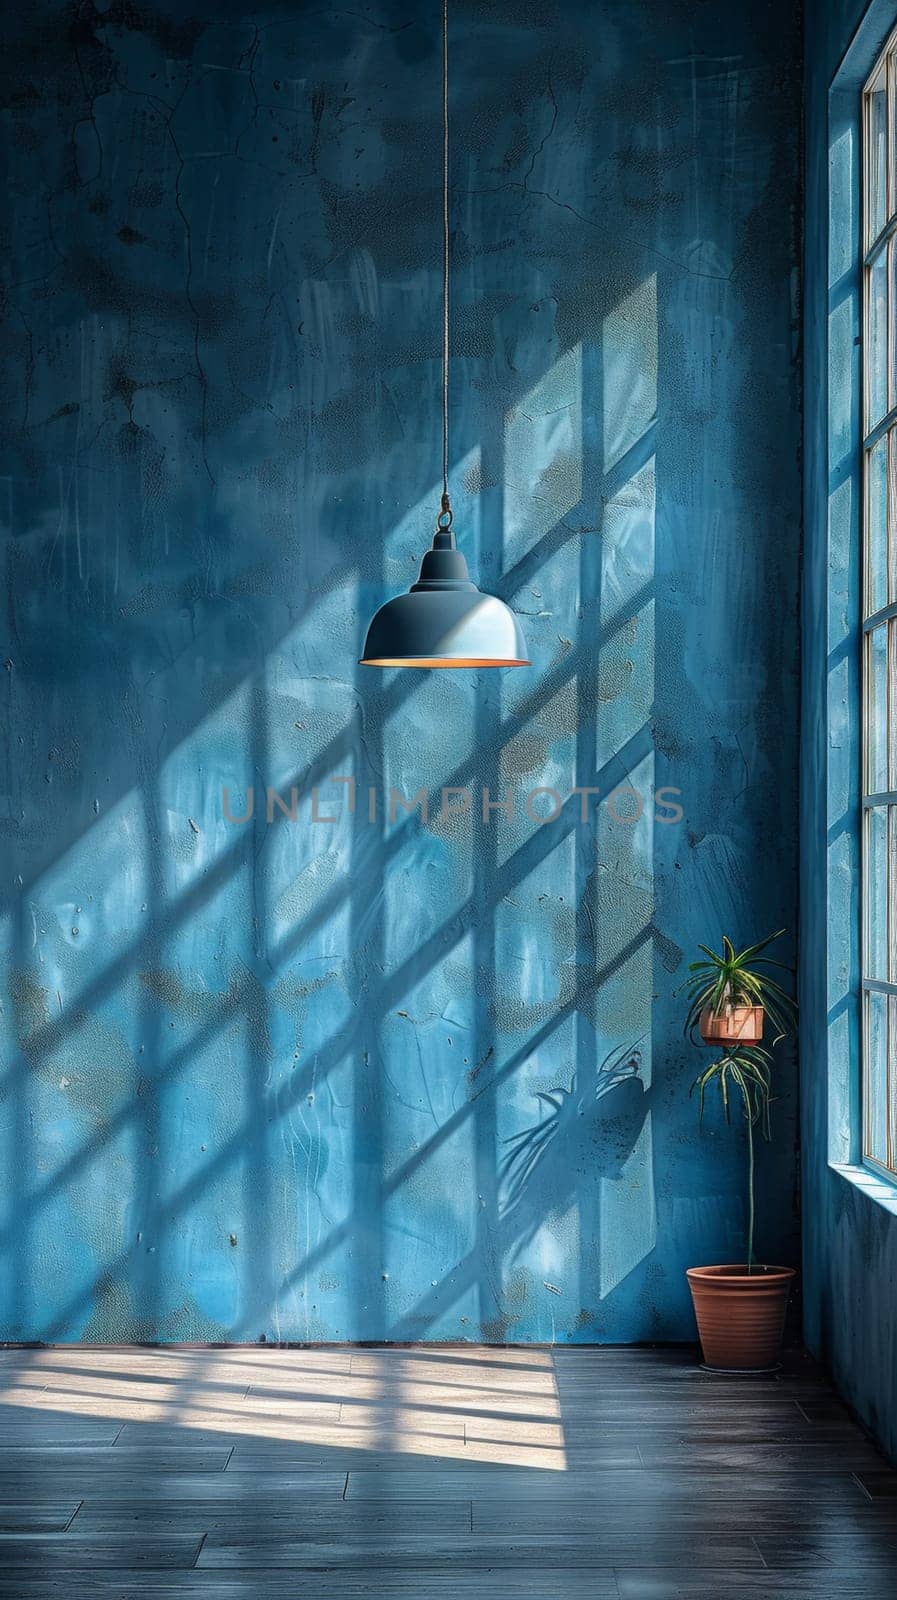 A blue wall with a potted plant and hanging light fixture